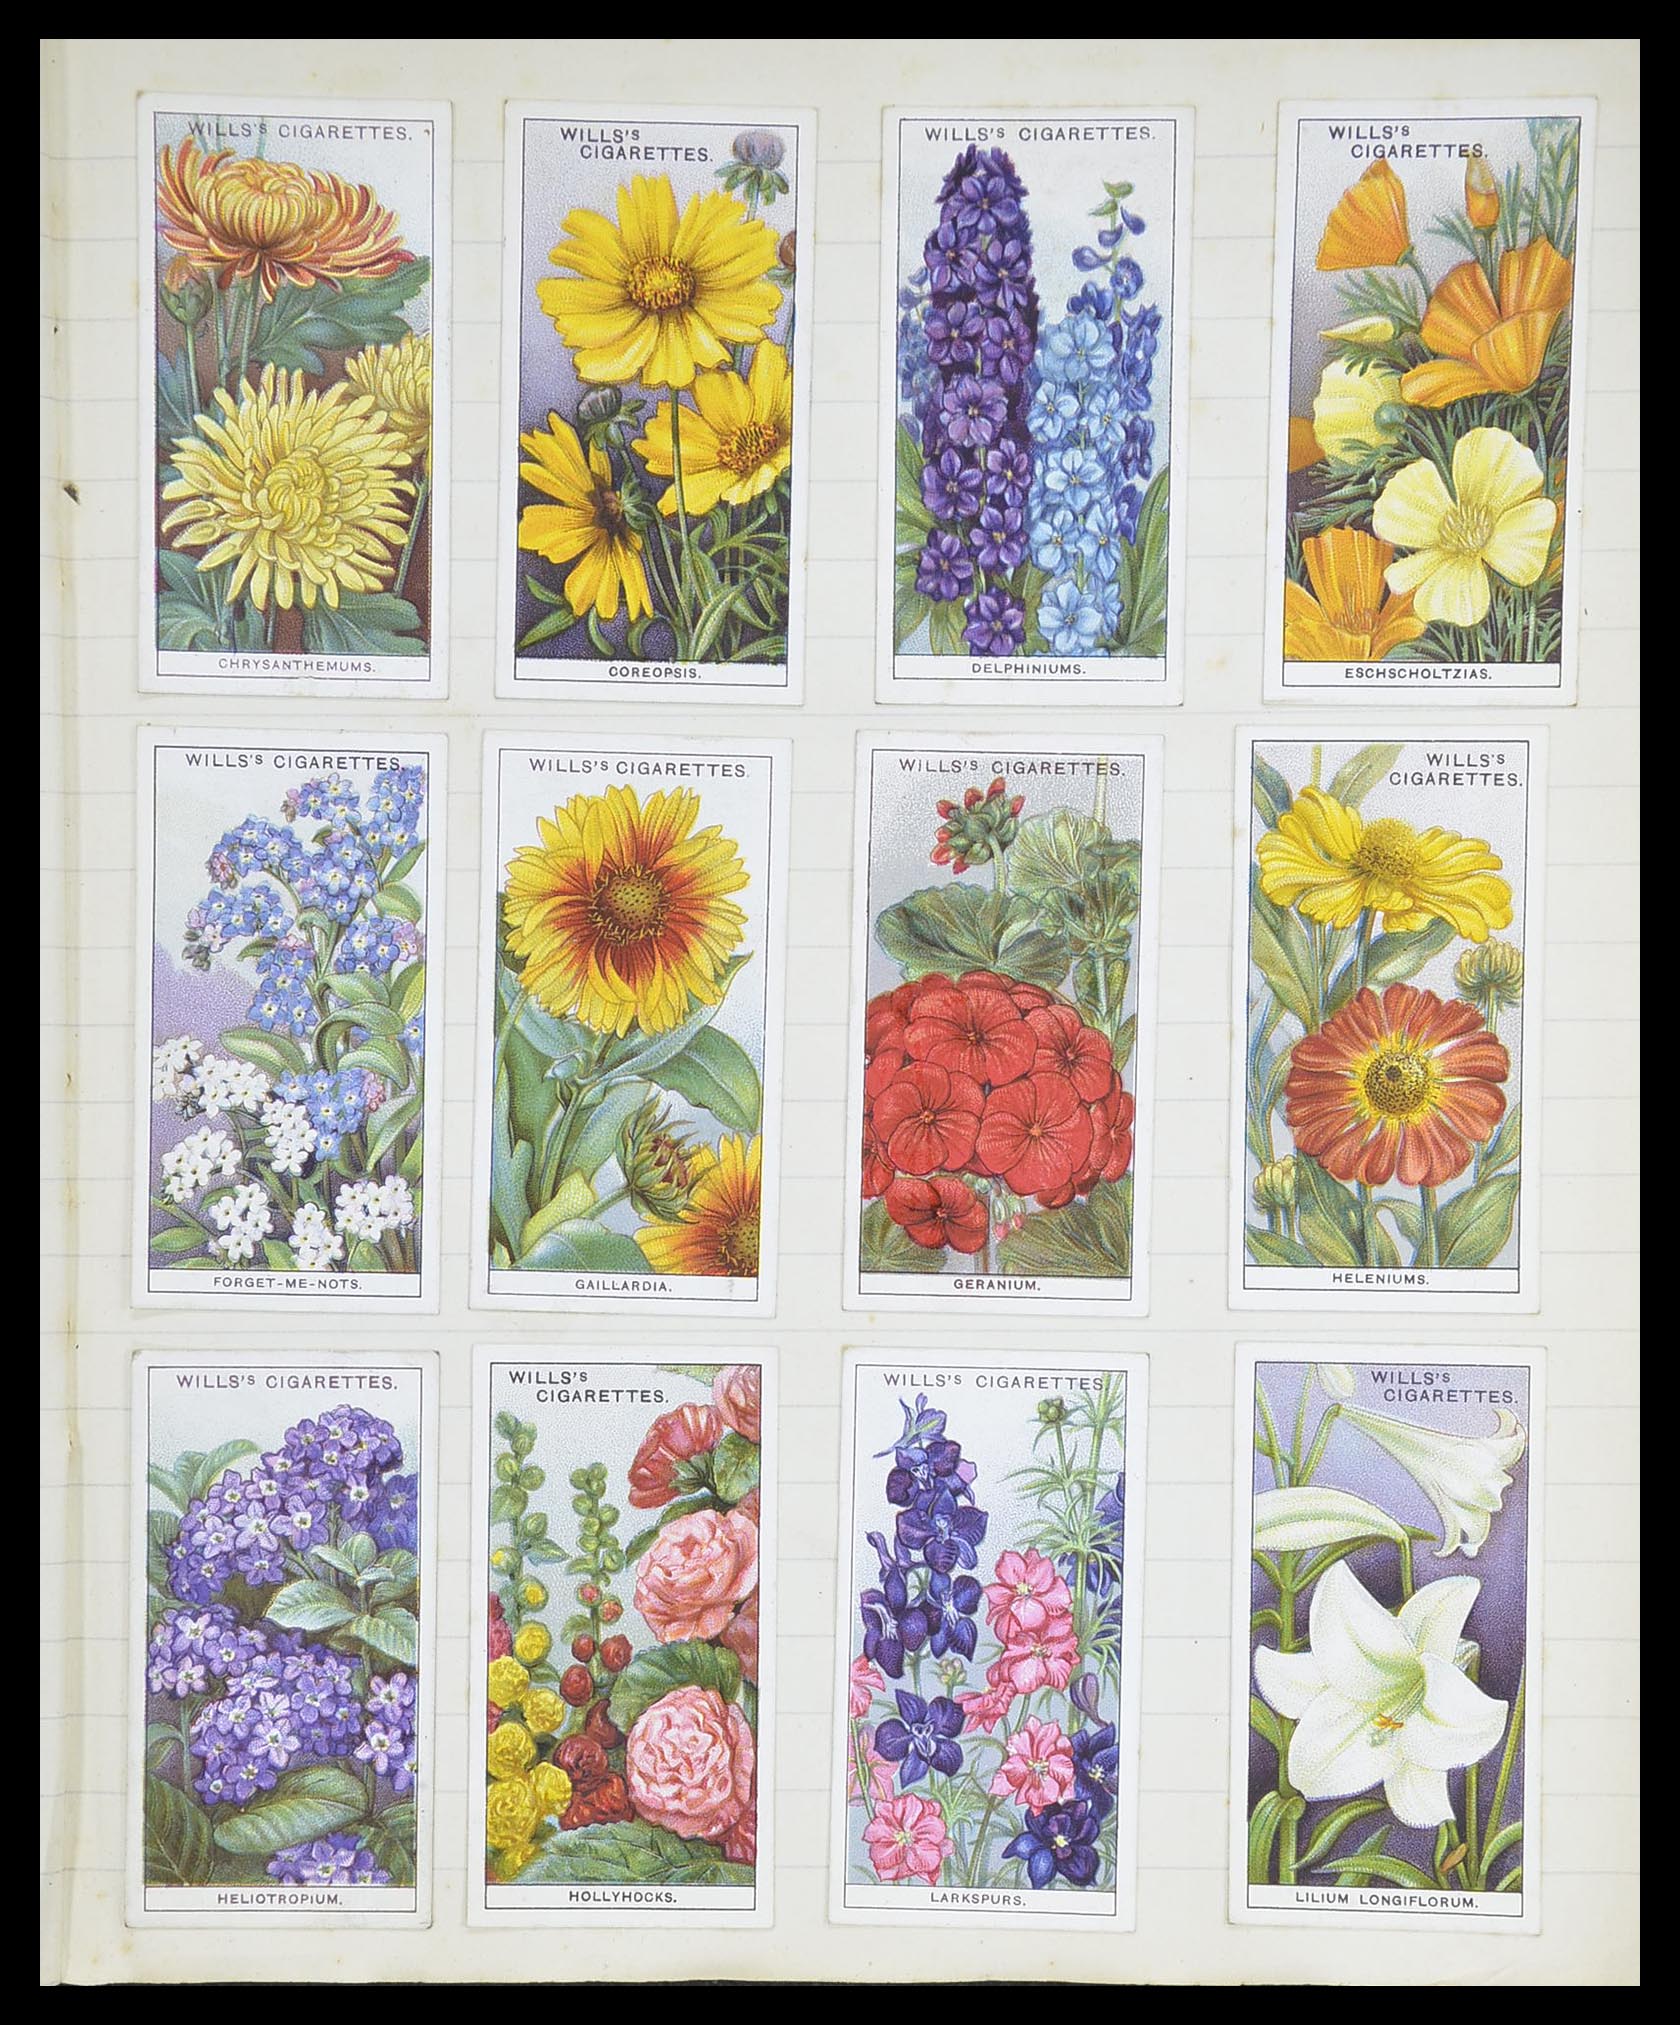 33444 075 - Stamp collection 33444 Great Britain cigarette cards.